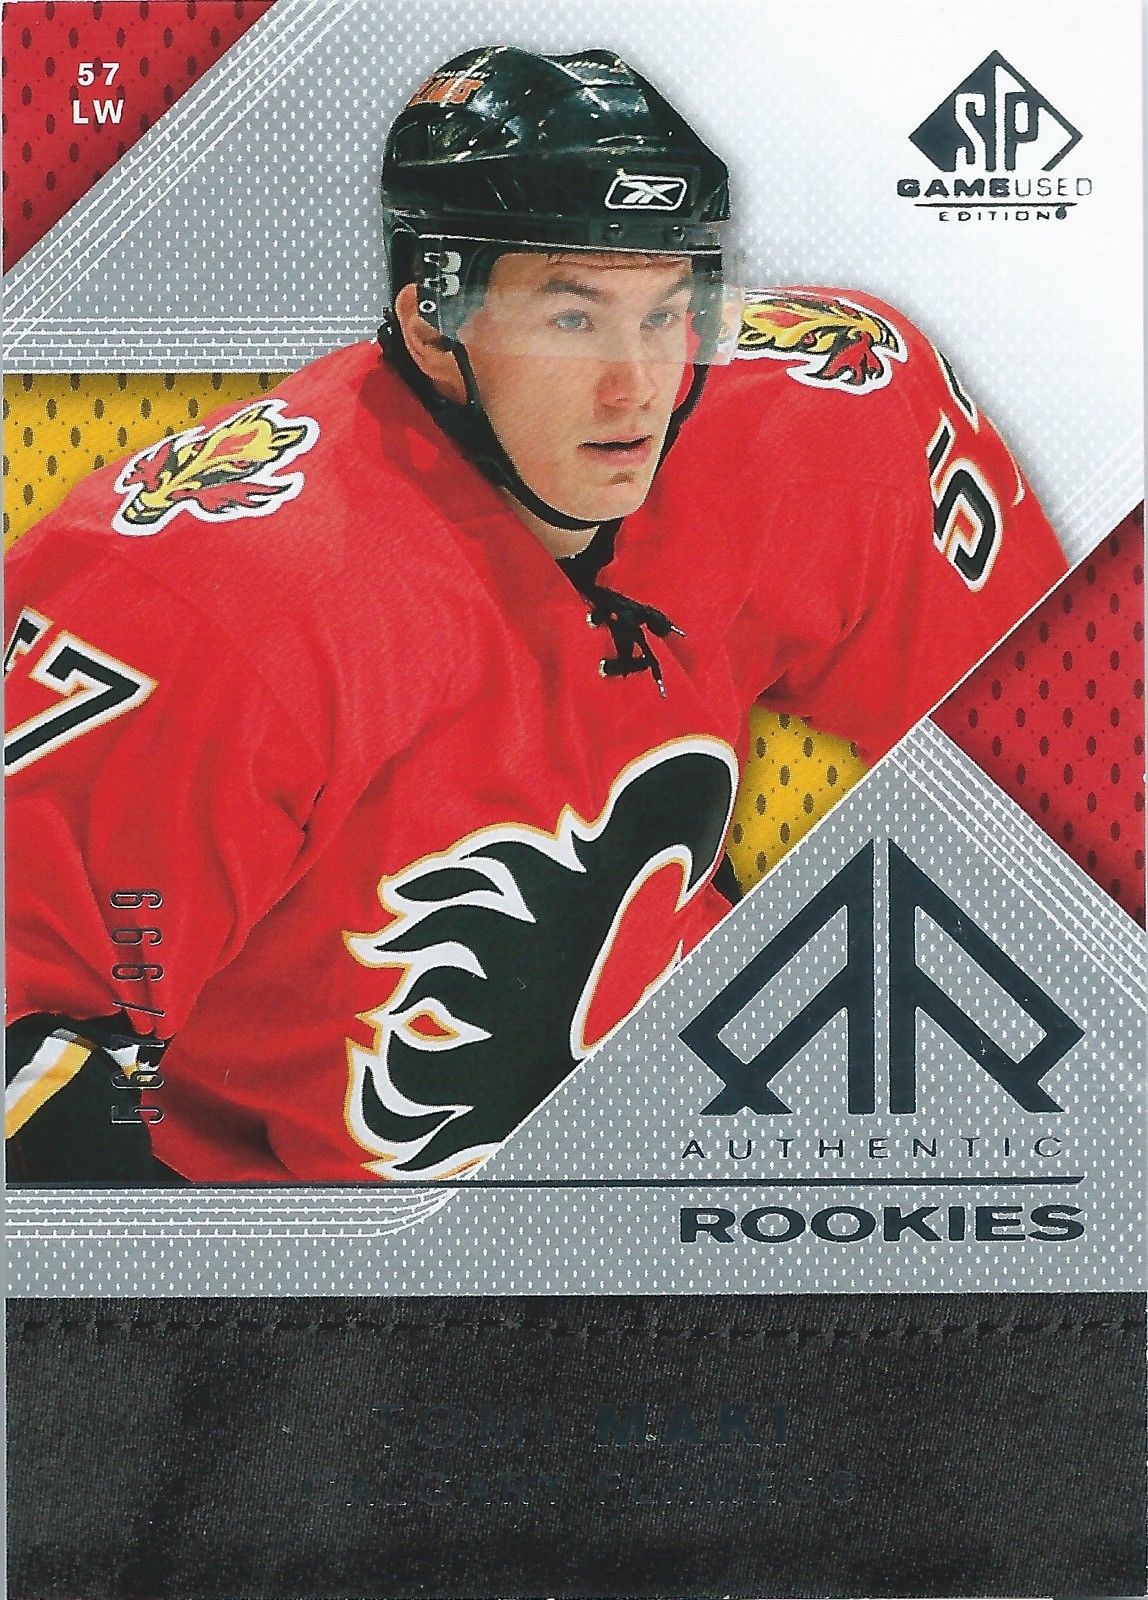  2007-08 SP Game Used TOMI MAKI Rookie /999 Upper Deck RC NHL 01560 Image 1